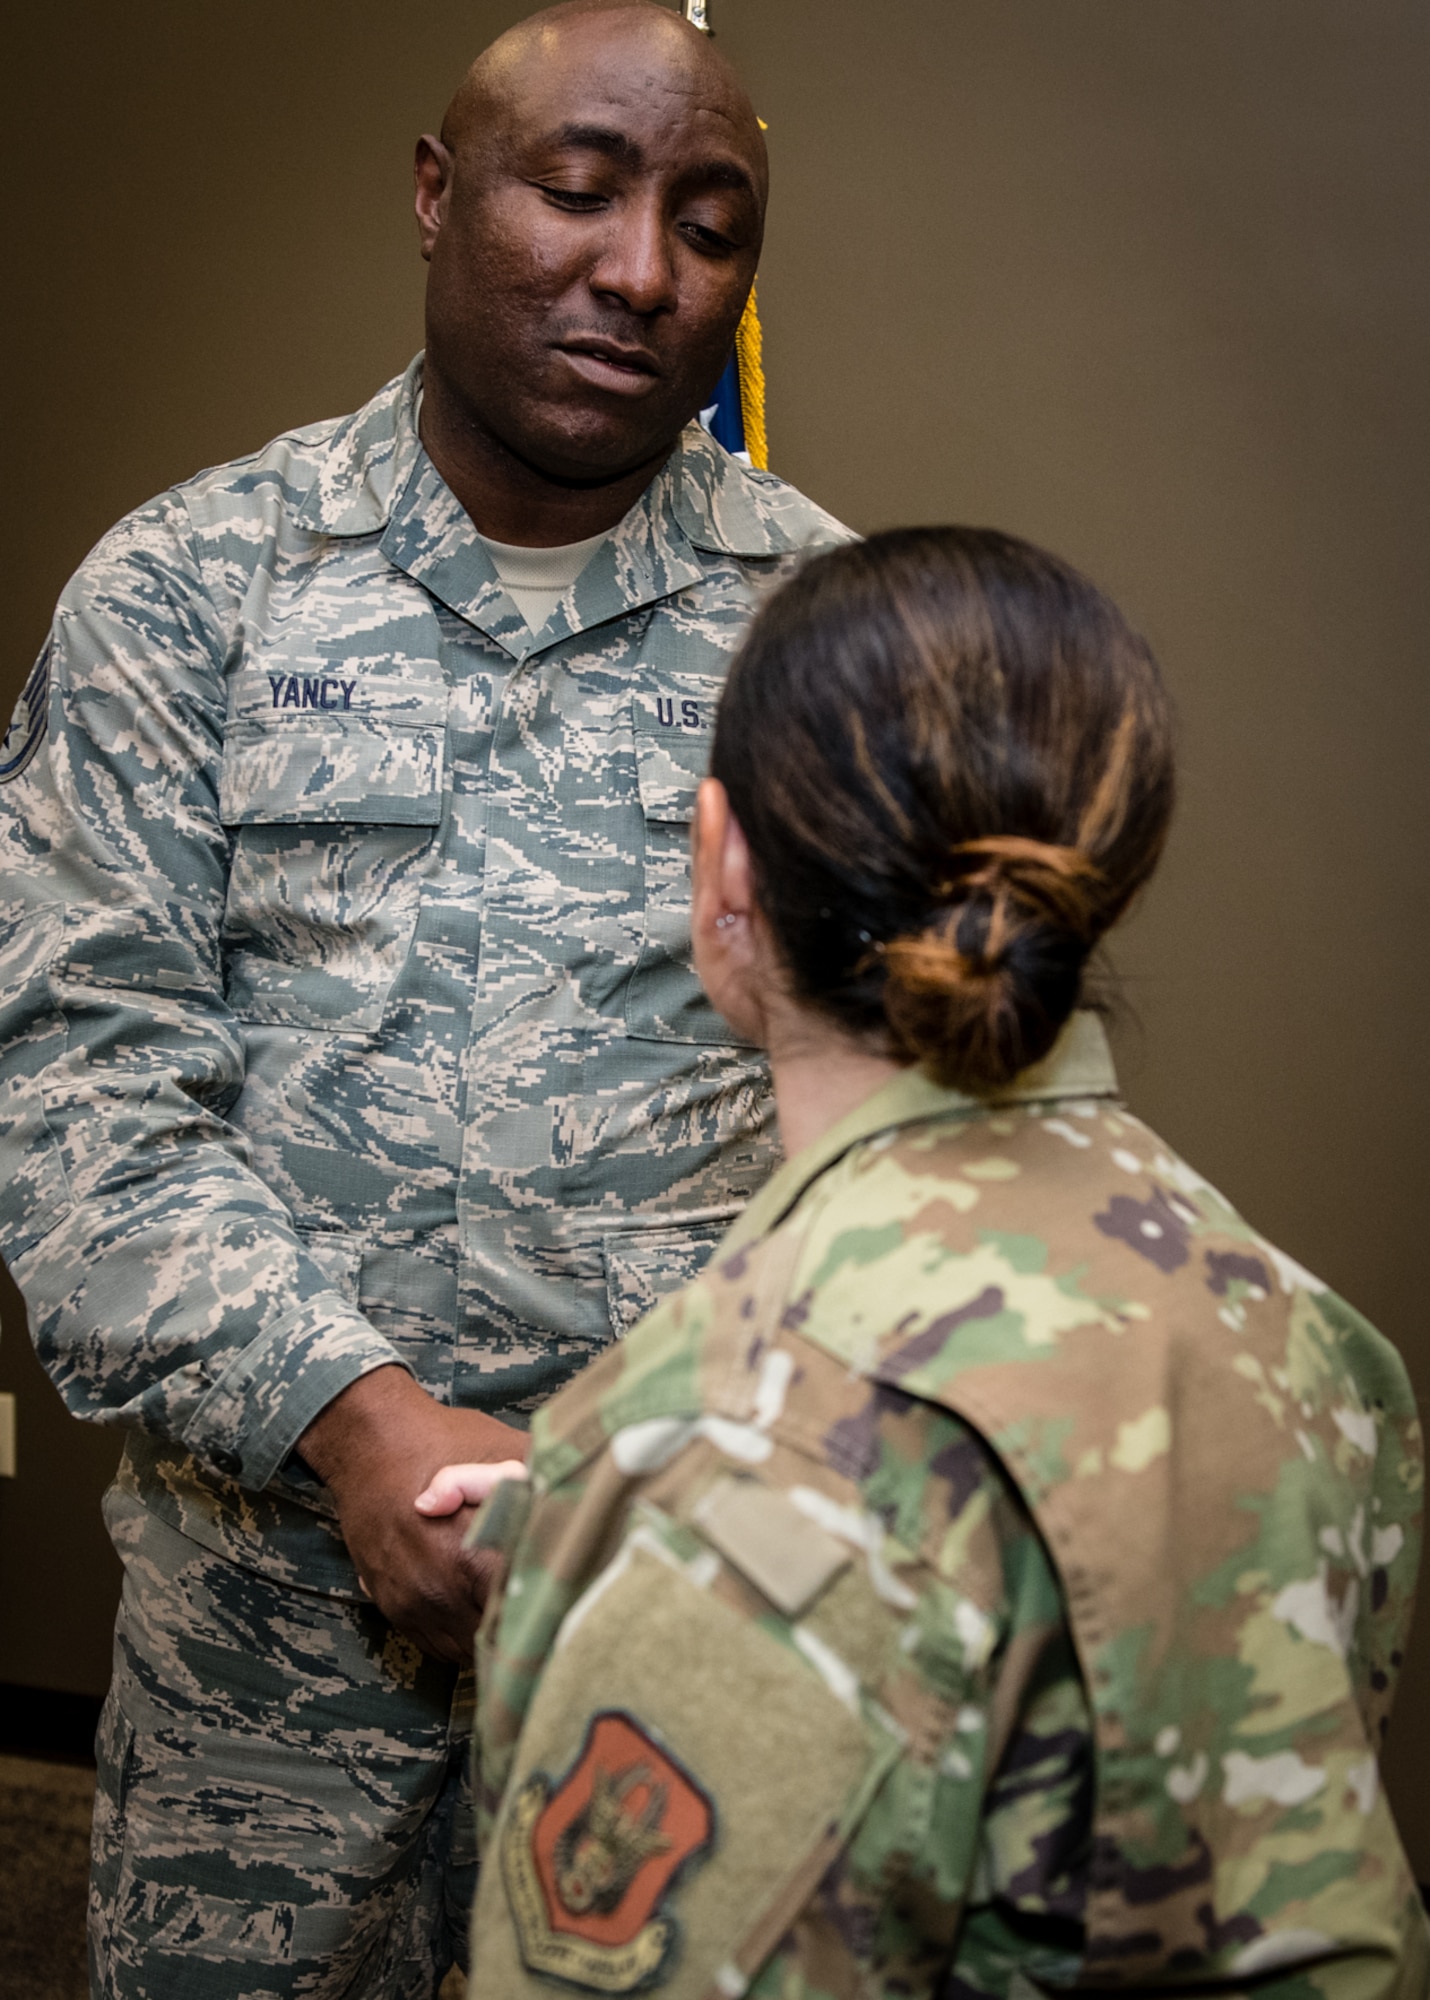 Retiring 932nd Force Support Squadron Services NCO, Staff Sgt. Germaine Yancy is thanked for his years of service during a coin presentation by 932nd Command Chief Barbara Gilmore, Nov. 16, 2019, Scott Air Force Base, Illinois. Yancy spent more than 28 years in the Marines, Navy, Air National Guard and always wanted to finish his career here at Scott Air Force Base. (U.S. Air Force photo by Master Sgt. Christopher Parr)